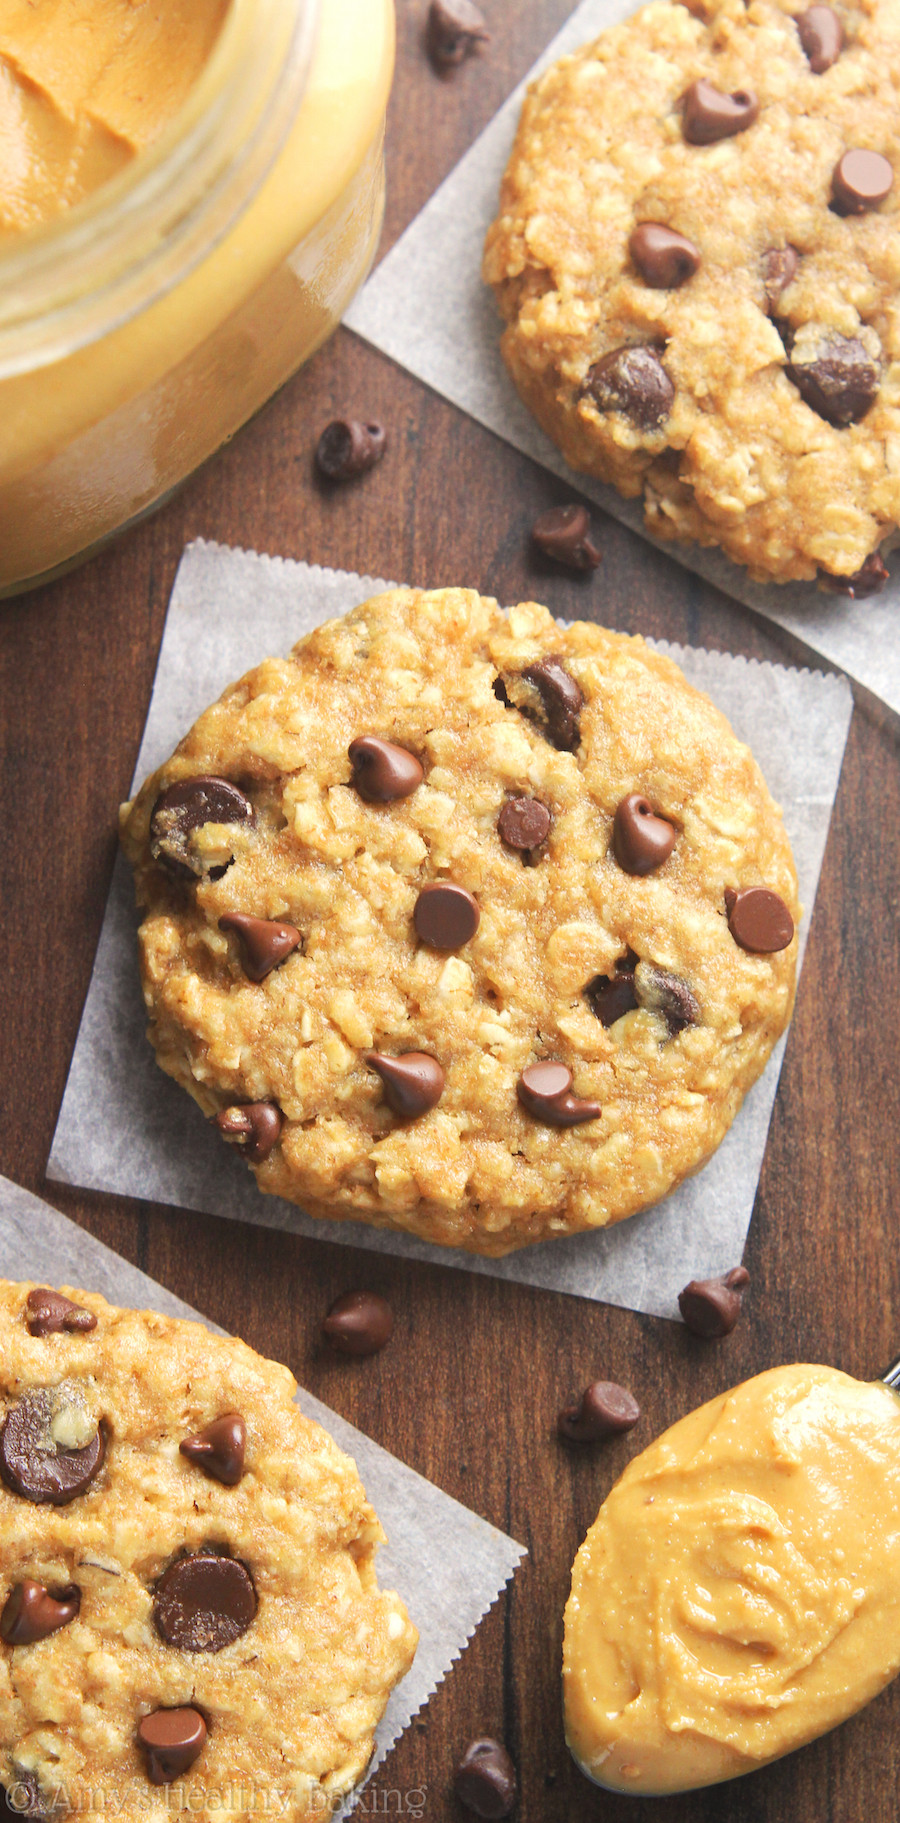 Healthy Oatmeal Peanut Butter Chocolate Chip Cookies
 healthy peanut butter oatmeal cookies